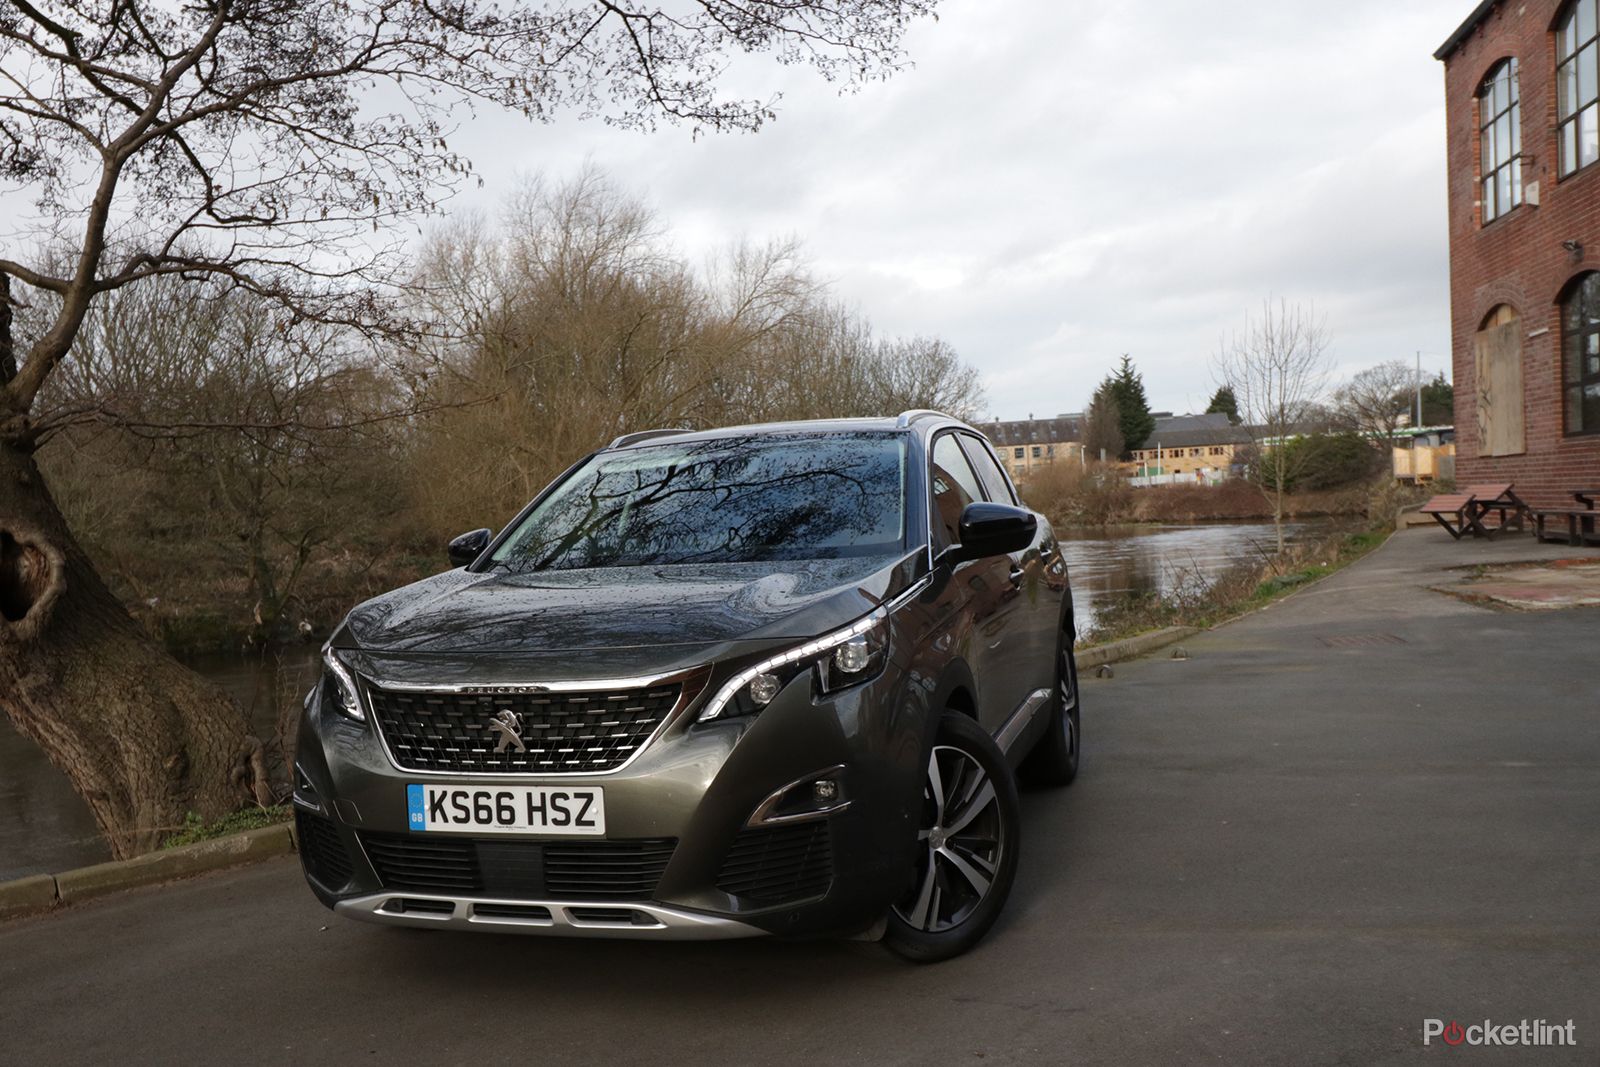 Peugeot 3008 review: Crossover with French flair